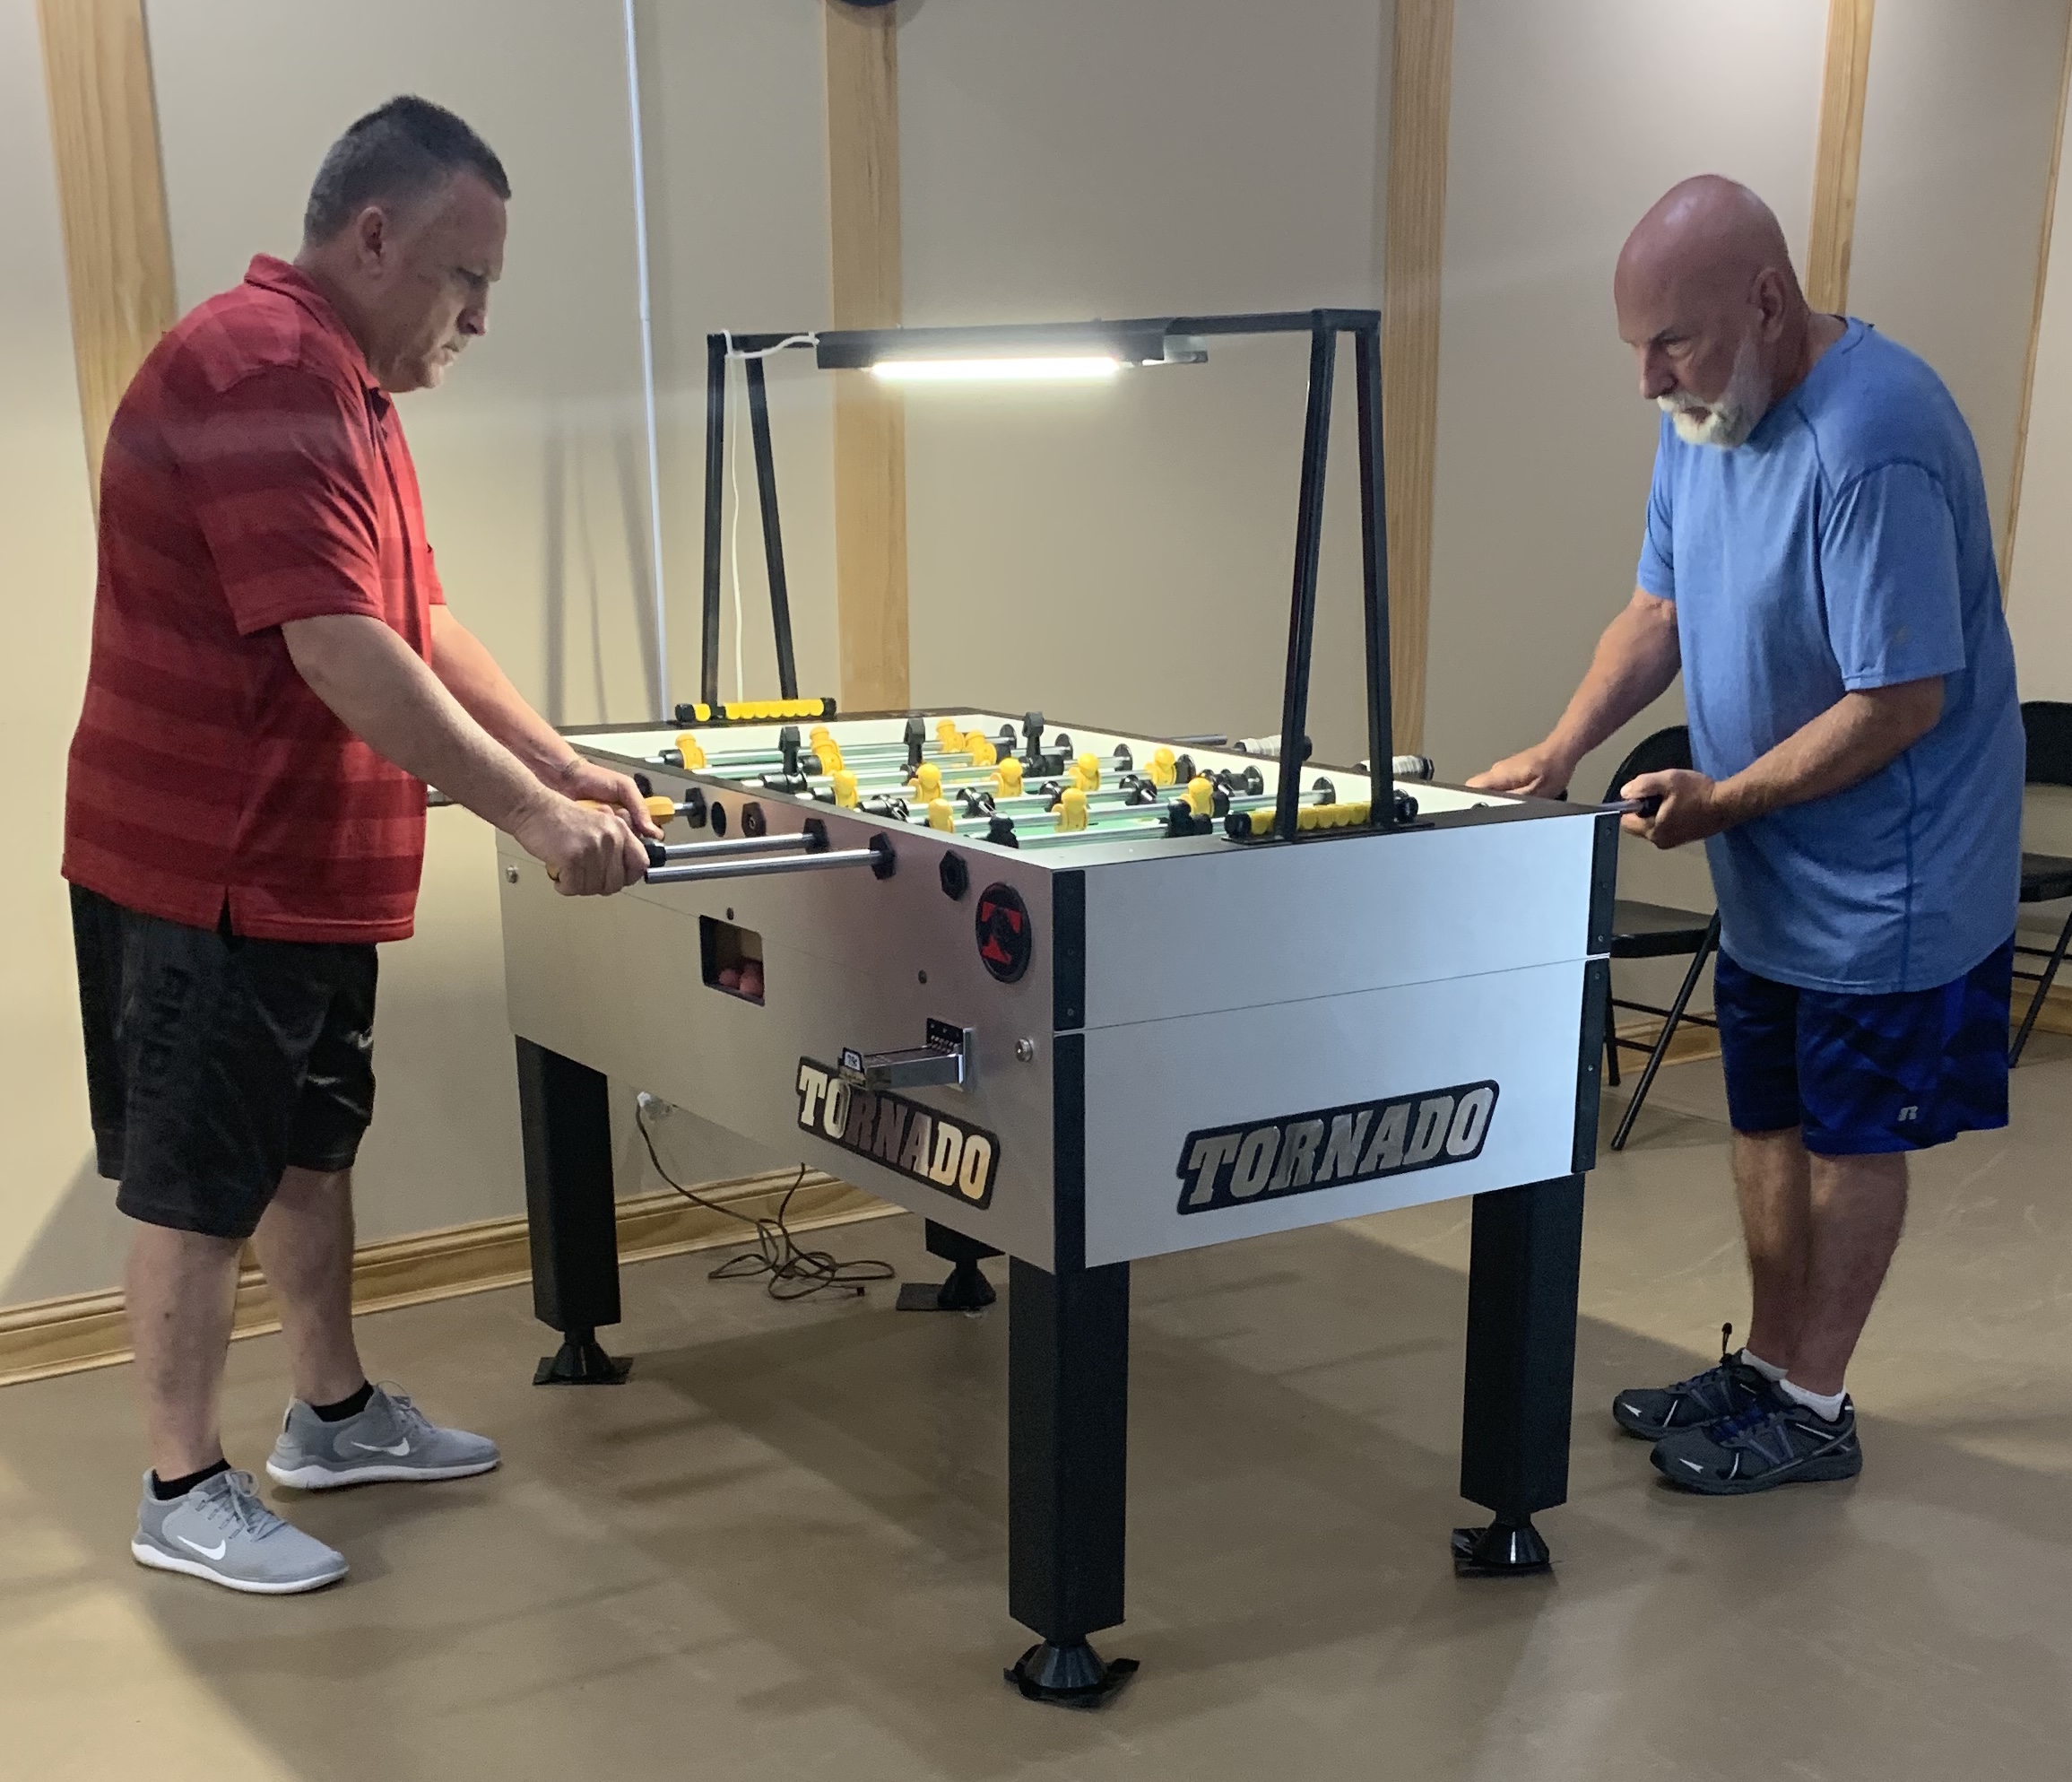 Shown still playing foosball at their young ages 60 and 67 are Jerry Stewart of Dora,AL and Mike Dickey of Huntsville,AL..